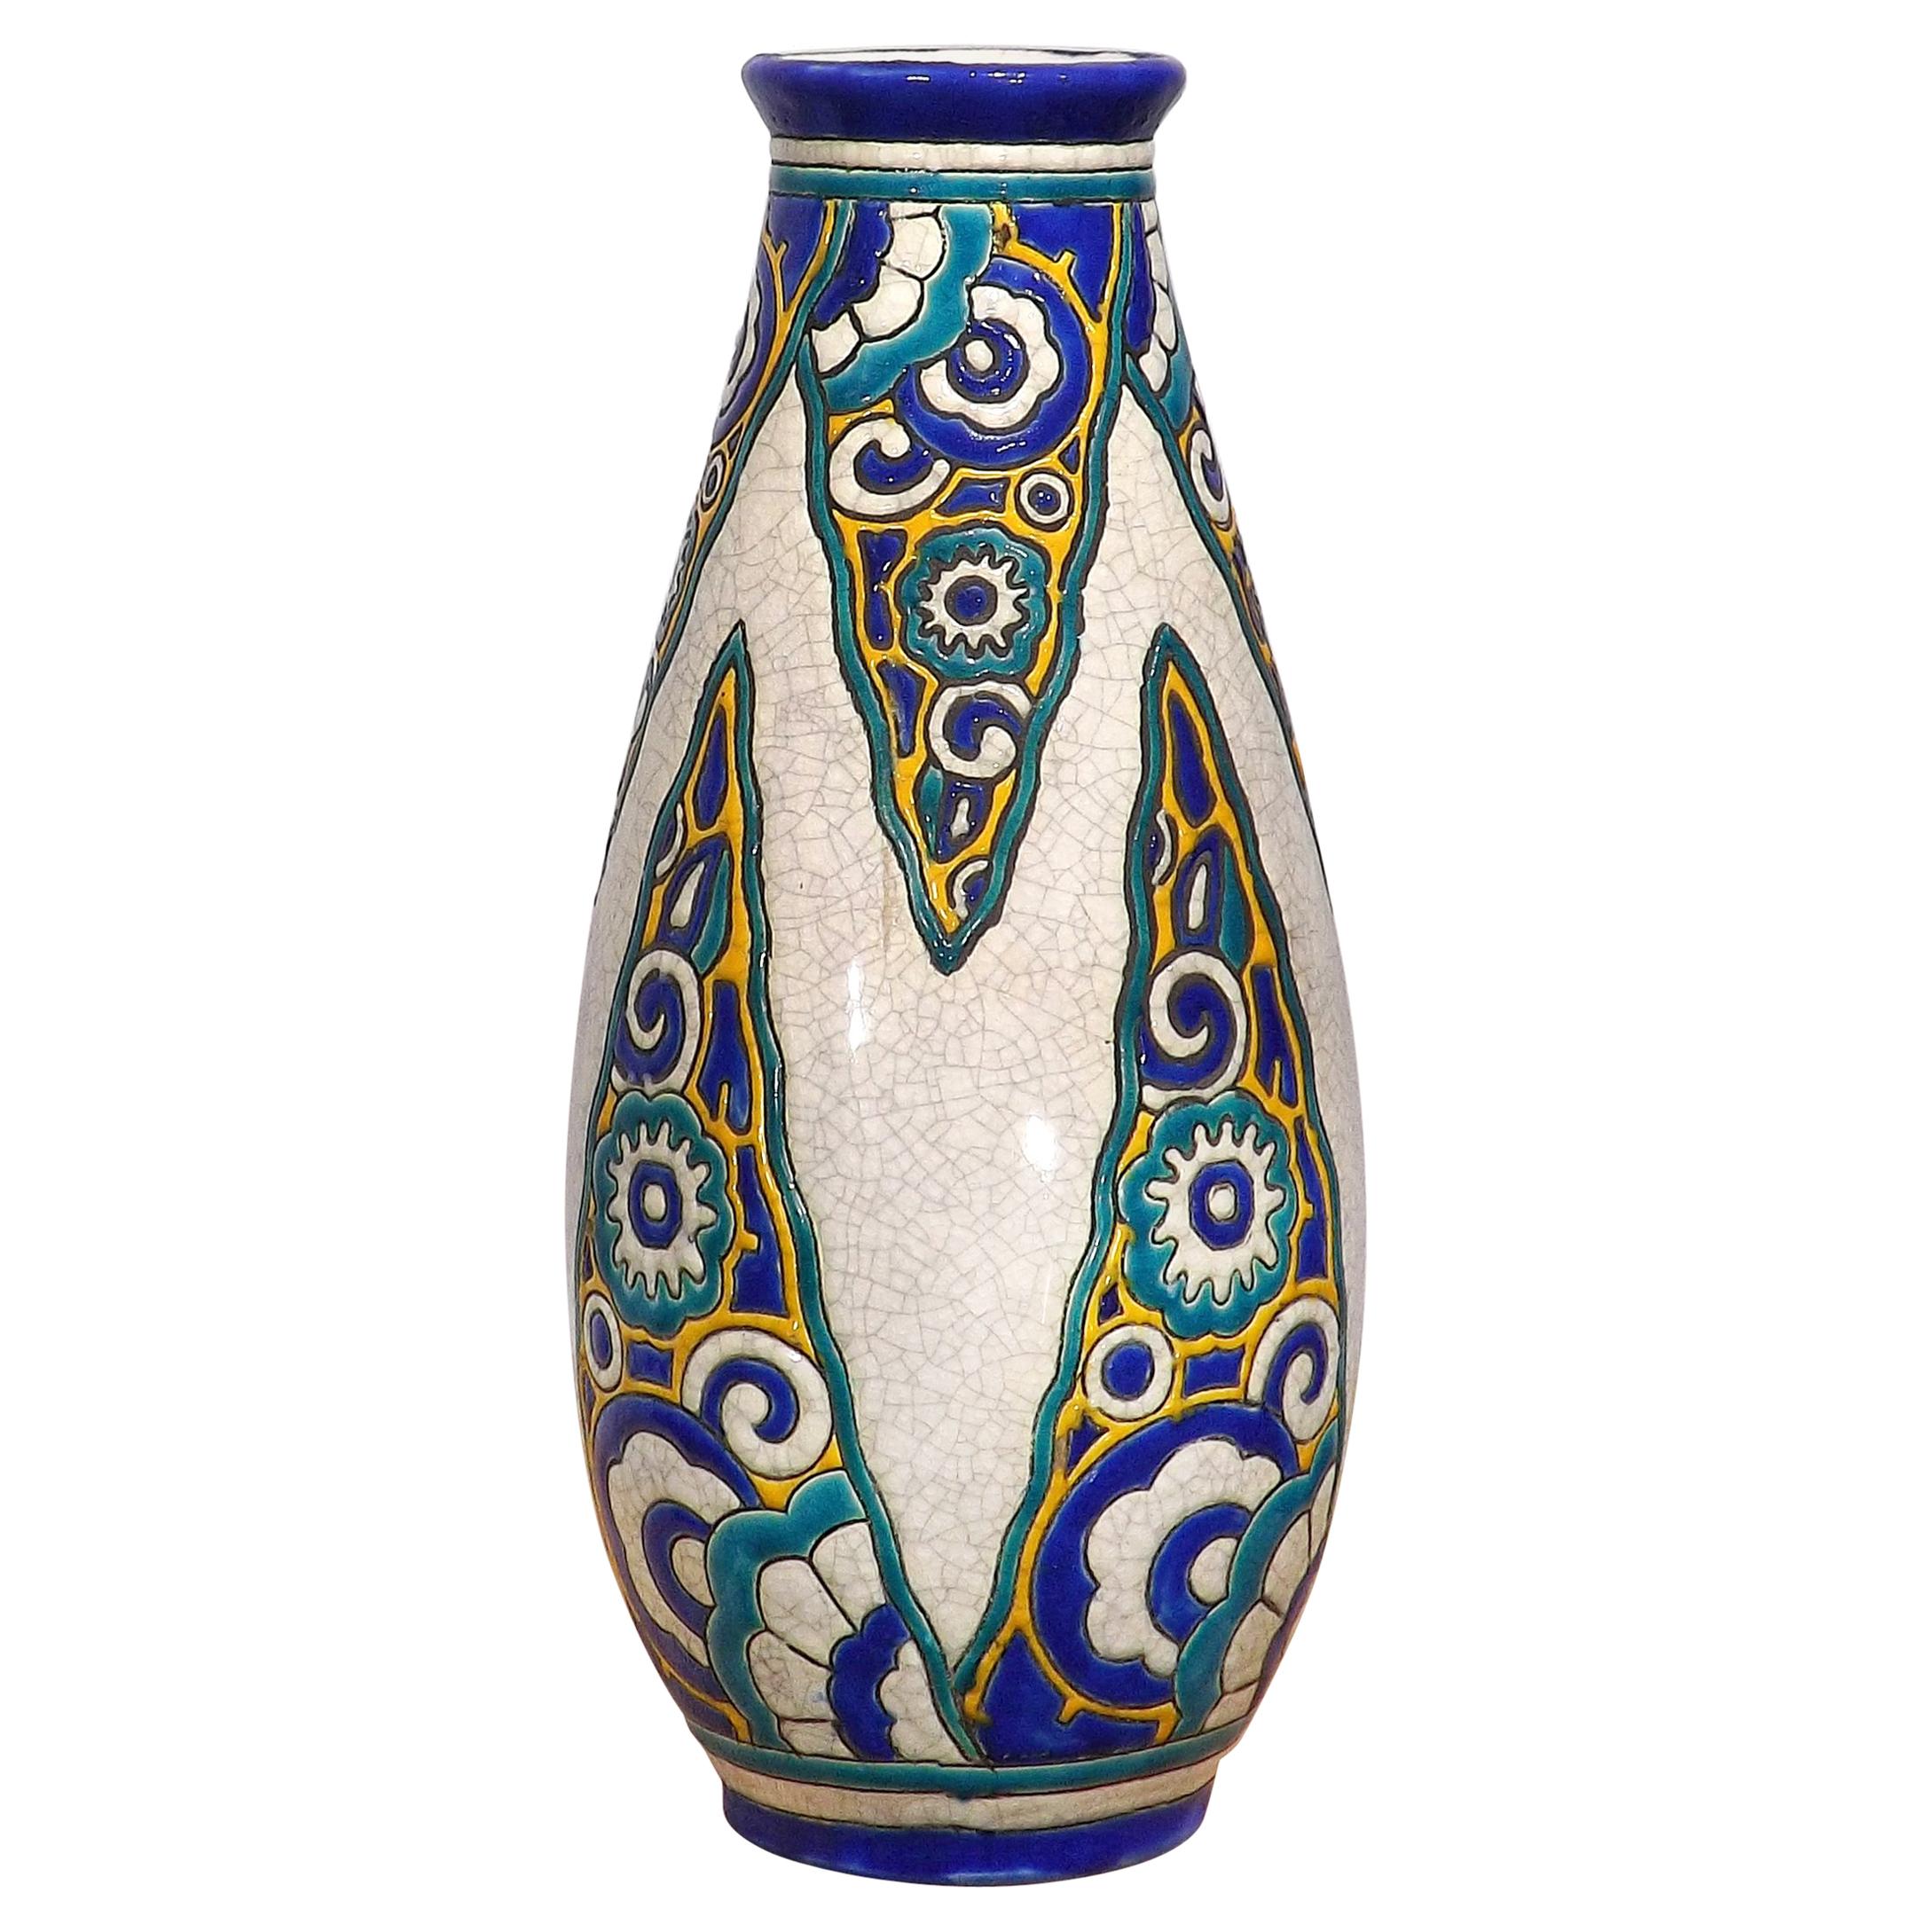 Art Deco Abstract Vase with Cobalt and Yellow by Boch Freres Keramis, 1920s